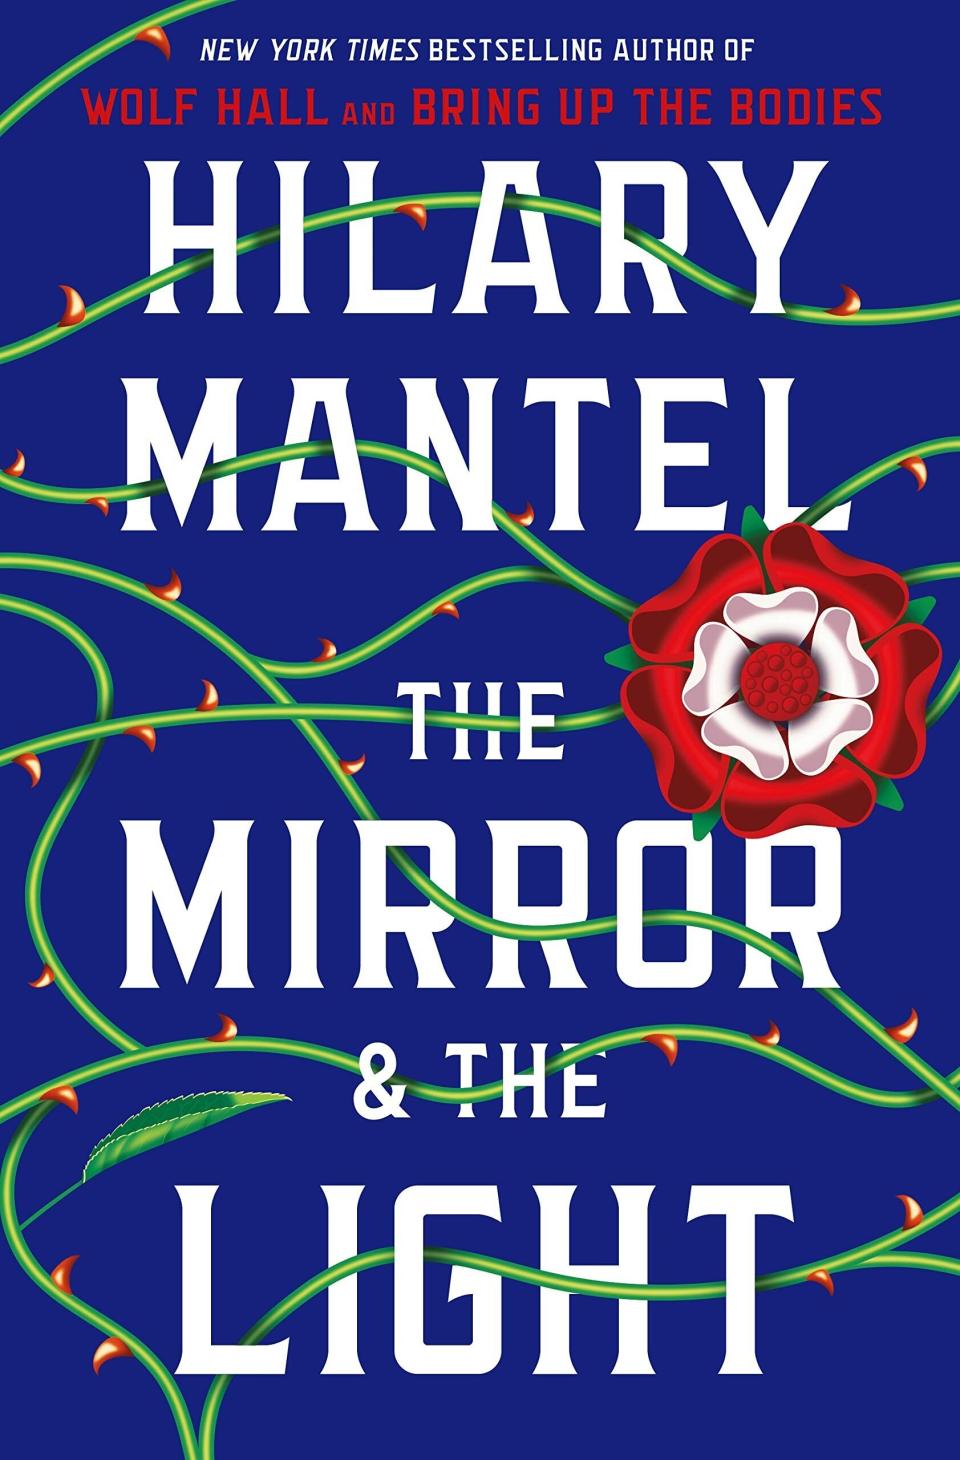 Hilary Mantel brings her historical fiction trilogy on Thomas Cromwell to a close with &ldquo;The Mirror And the Light.&rdquo; It picks up in May 1536 after the execution of Anne Boleyn. Cromwell sees the future of a new nation on the horizon, but he&rsquo;s faced with rebellion at home, invaders on the horizon and a king notorious for turning on those closest to him. Need to start from the beginning? The first novel in this series is &ldquo;<a href="https://amzn.to/2PF0wUX" target="_blank" rel="noopener noreferrer">Wolf Hall</a>&rdquo; followed by &ldquo;<a href="https://amzn.to/38j7XYh" target="_blank" rel="noopener noreferrer">Bring Up the Bodies</a>.&rdquo; Read more about it on <a href="https://www.goodreads.com/book/show/45992717-the-mirror-the-light" target="_blank" rel="noopener noreferrer">Goodreads</a>, and <a href="https://amzn.to/2VFNmuu" target="_blank" rel="noopener noreferrer">grab a copy on Amazon</a>.&nbsp;<br /><br /><i>Expected release date: March 10</i>